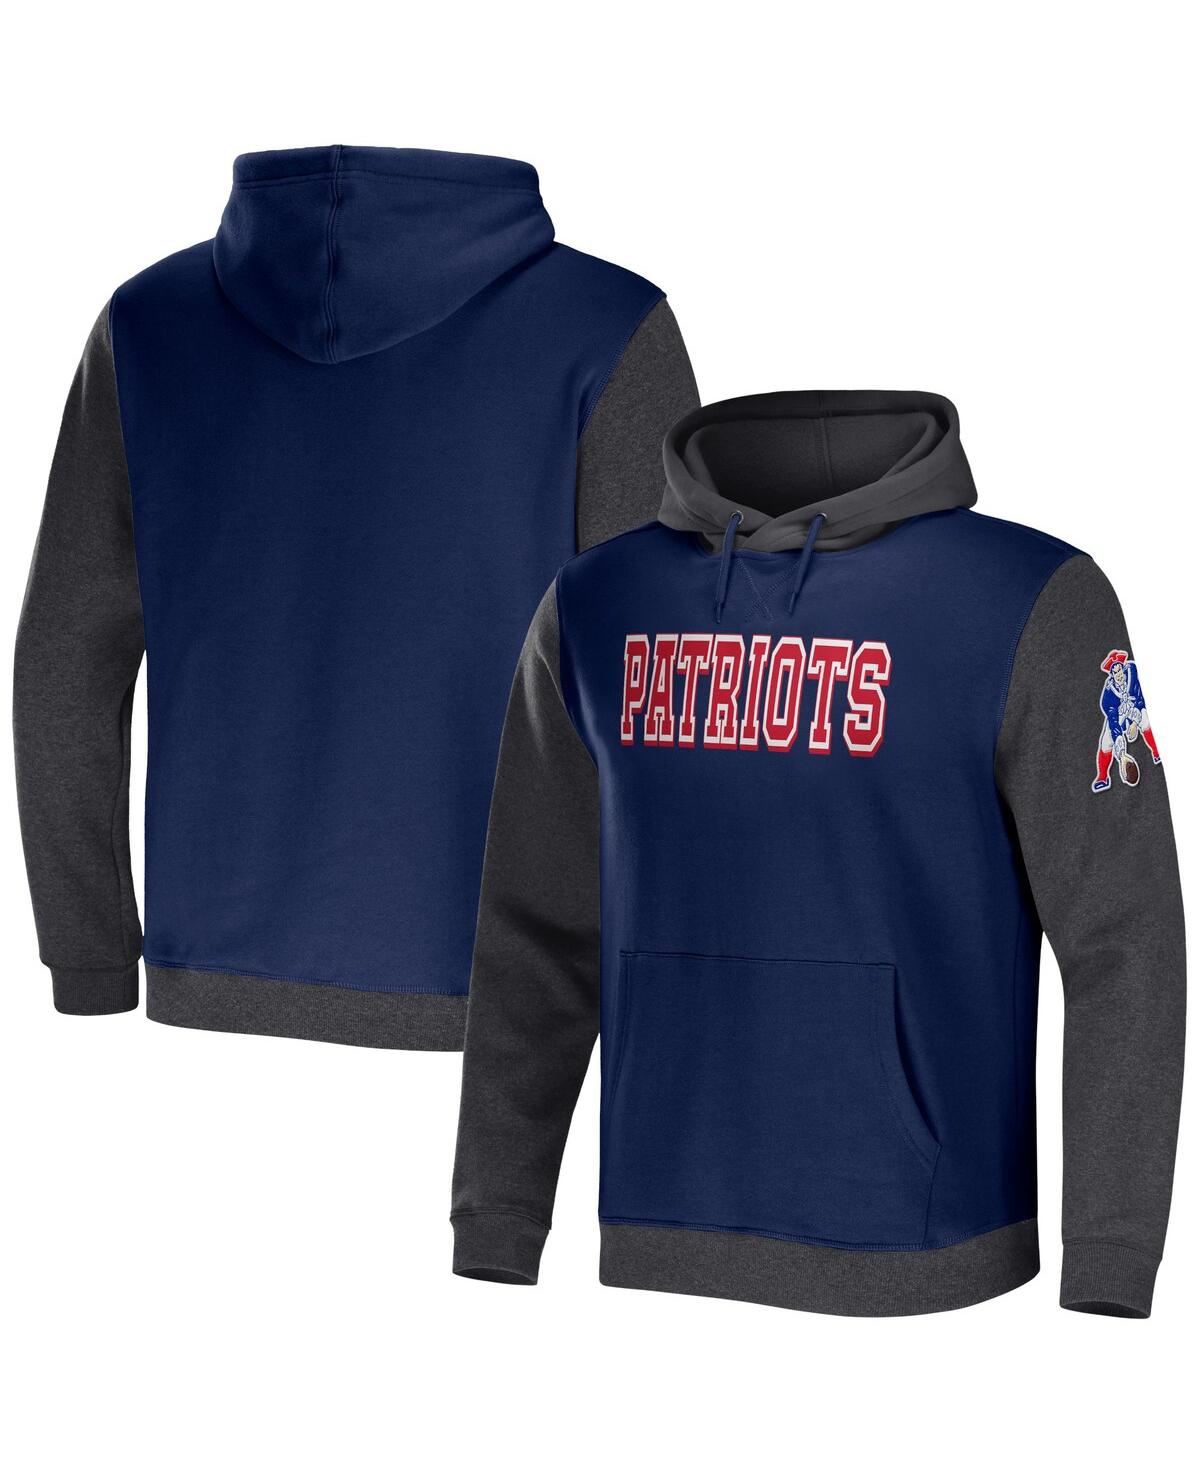 Fanatics Men's Nfl X Darius Rucker Collection By  Navy, Charcoal New England Patriots Colorblock Pull In Navy,charcoal